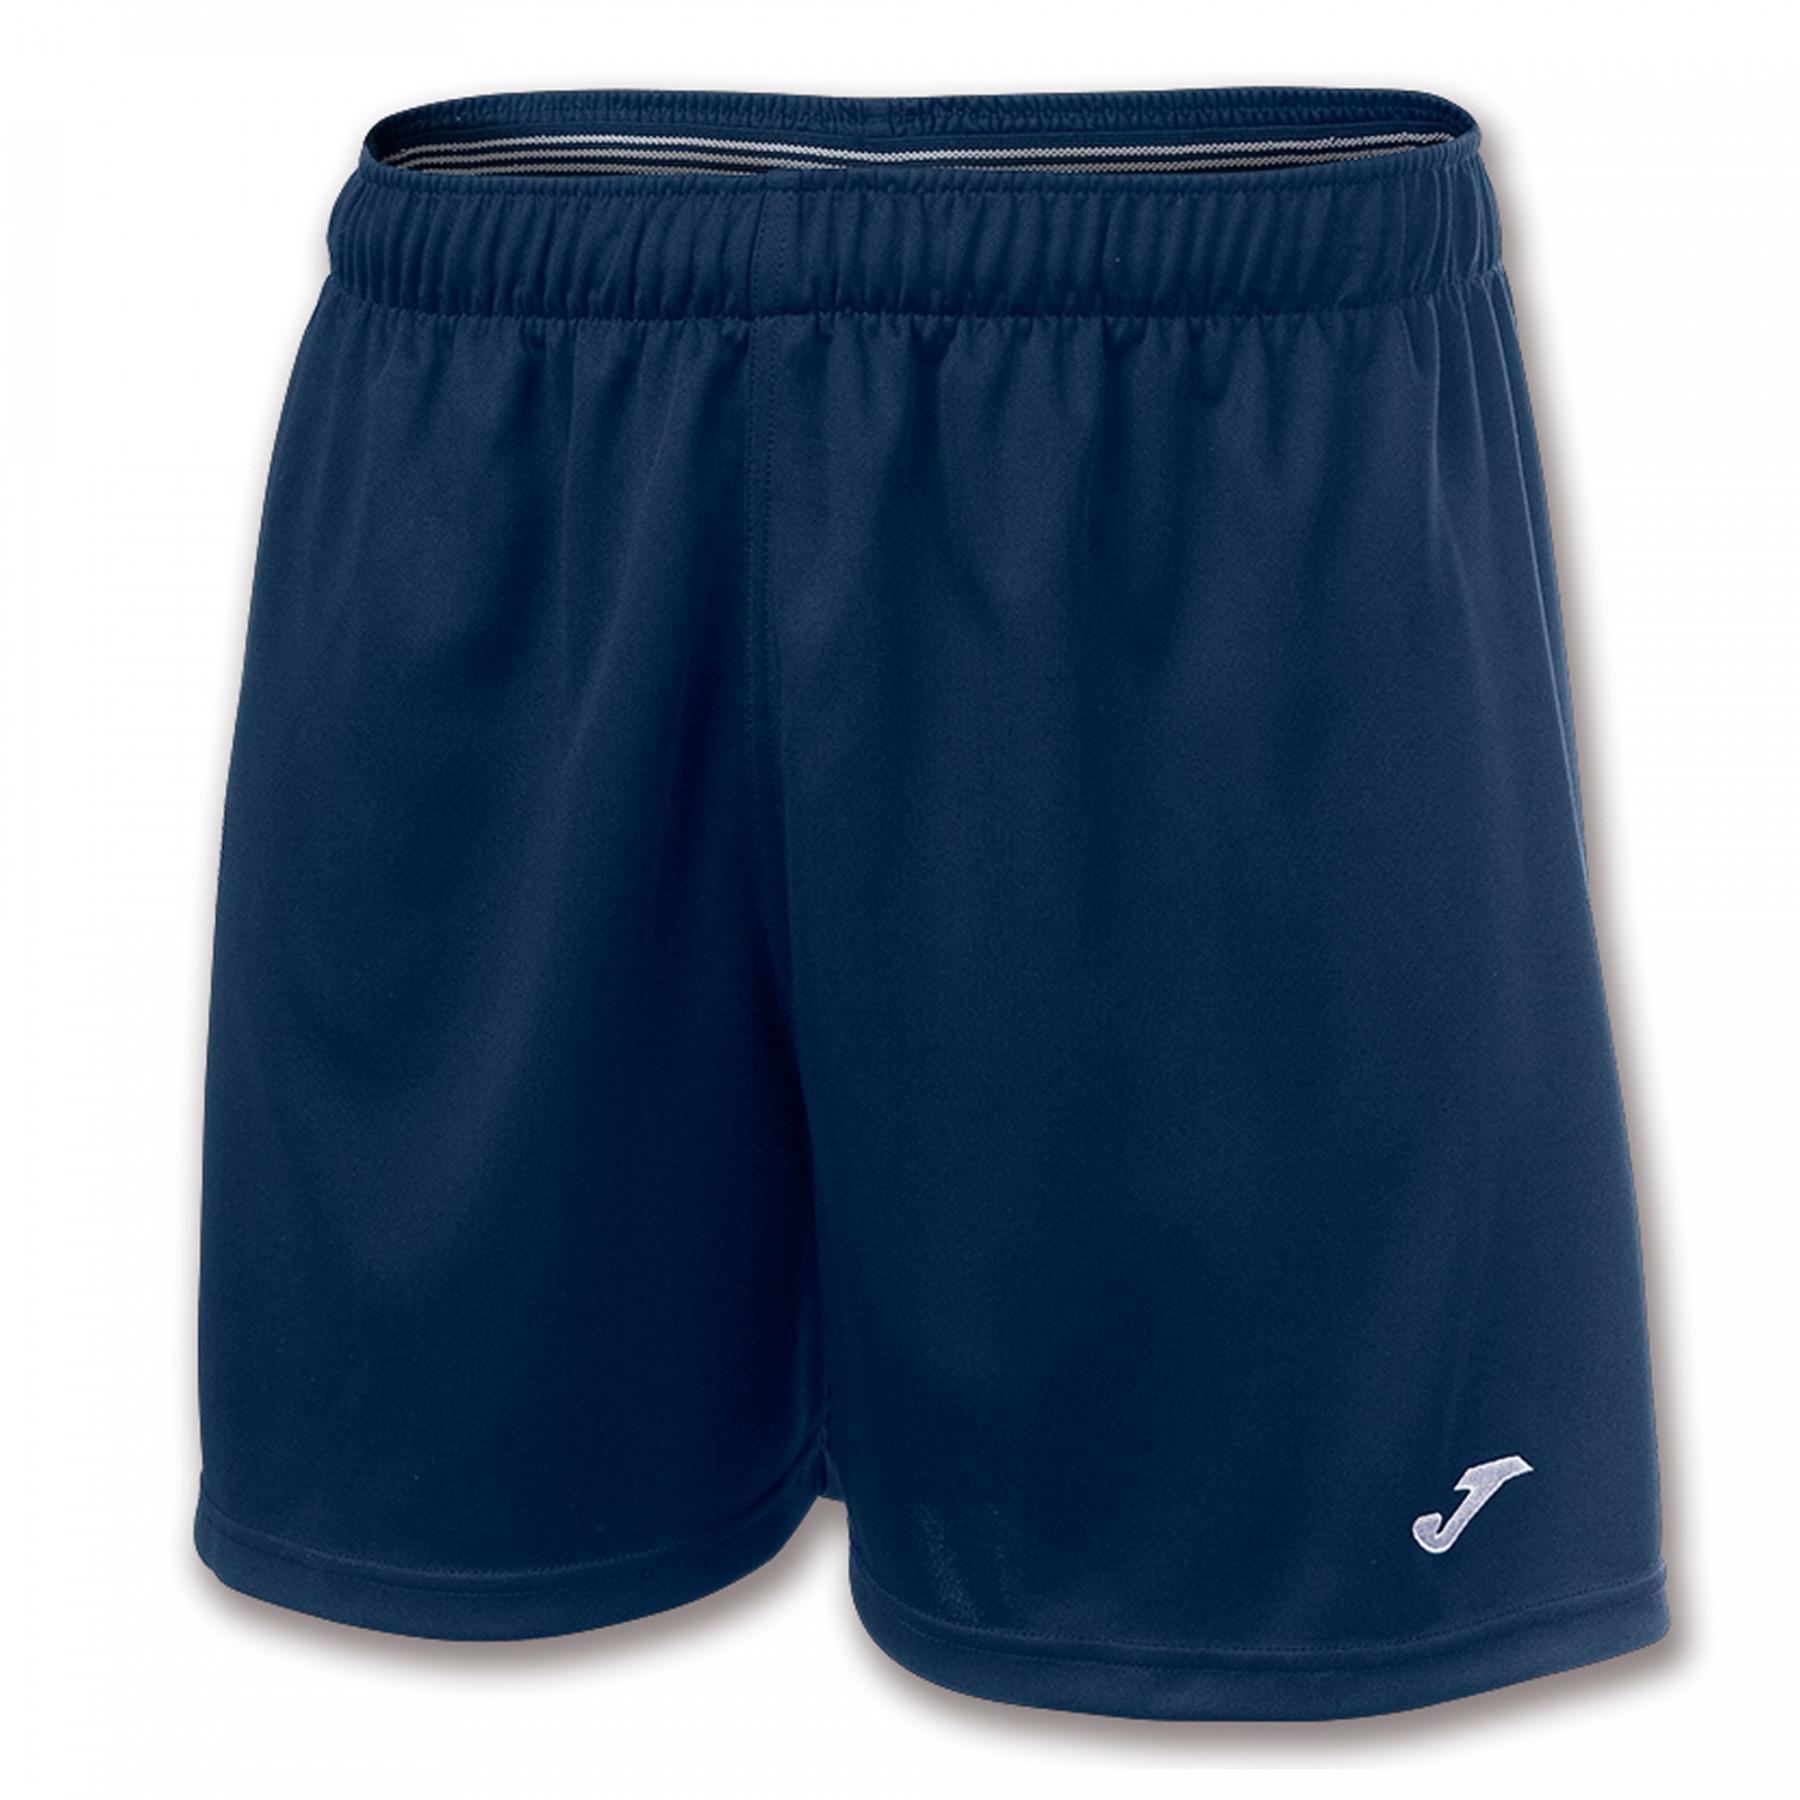 Junior Shorts Joma Prorugby